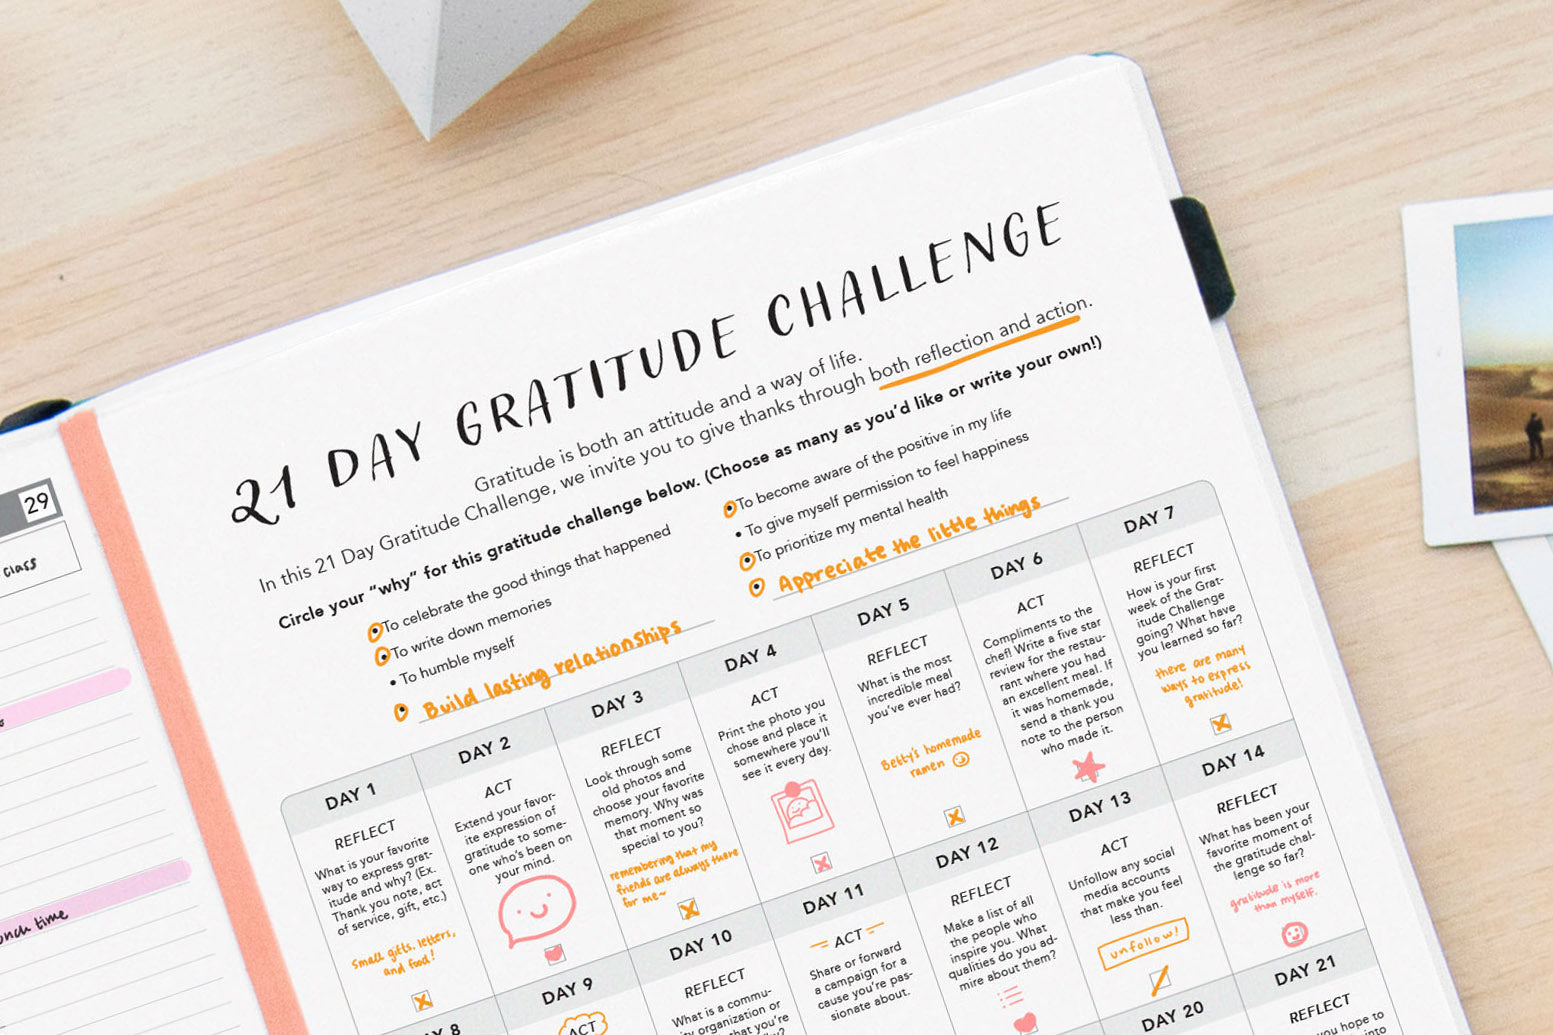 21 Gratitude Challenge Sheet: Ask yourself why you're doing the challenge, followed by the prompts for each day. 